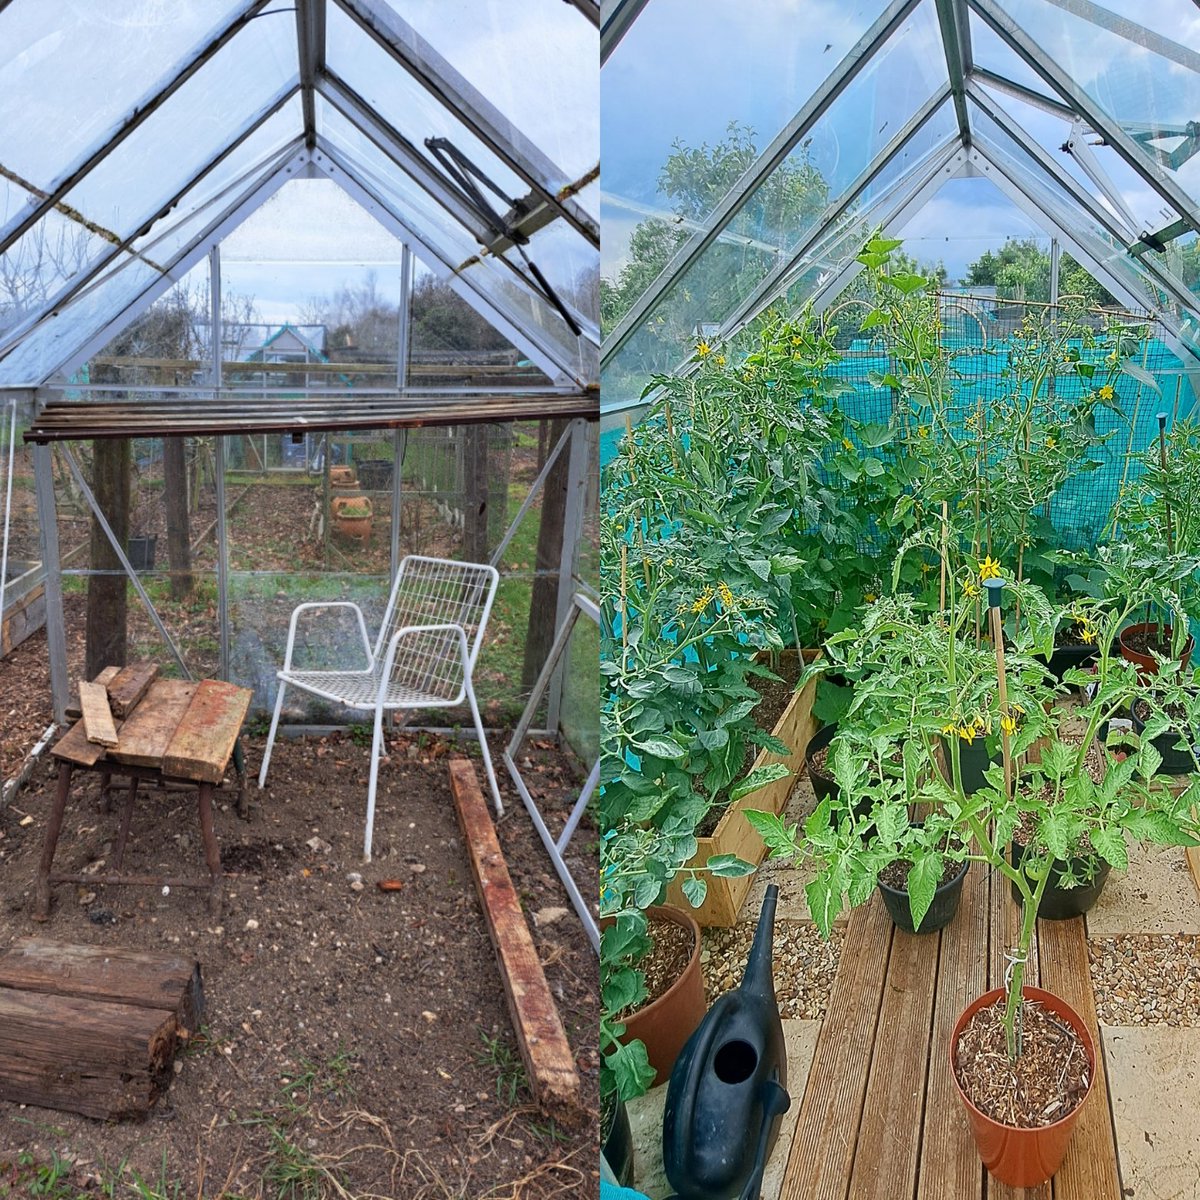 The transformation of our large greenhouse is amazing.Every day, we tend to the plants they are growing so much. Here's a before renovation and after #allotment #allotmentuk #allotmentgardening #growyourownfood #firstallotment #greenhouse #growvegetables #growyourown #growfood